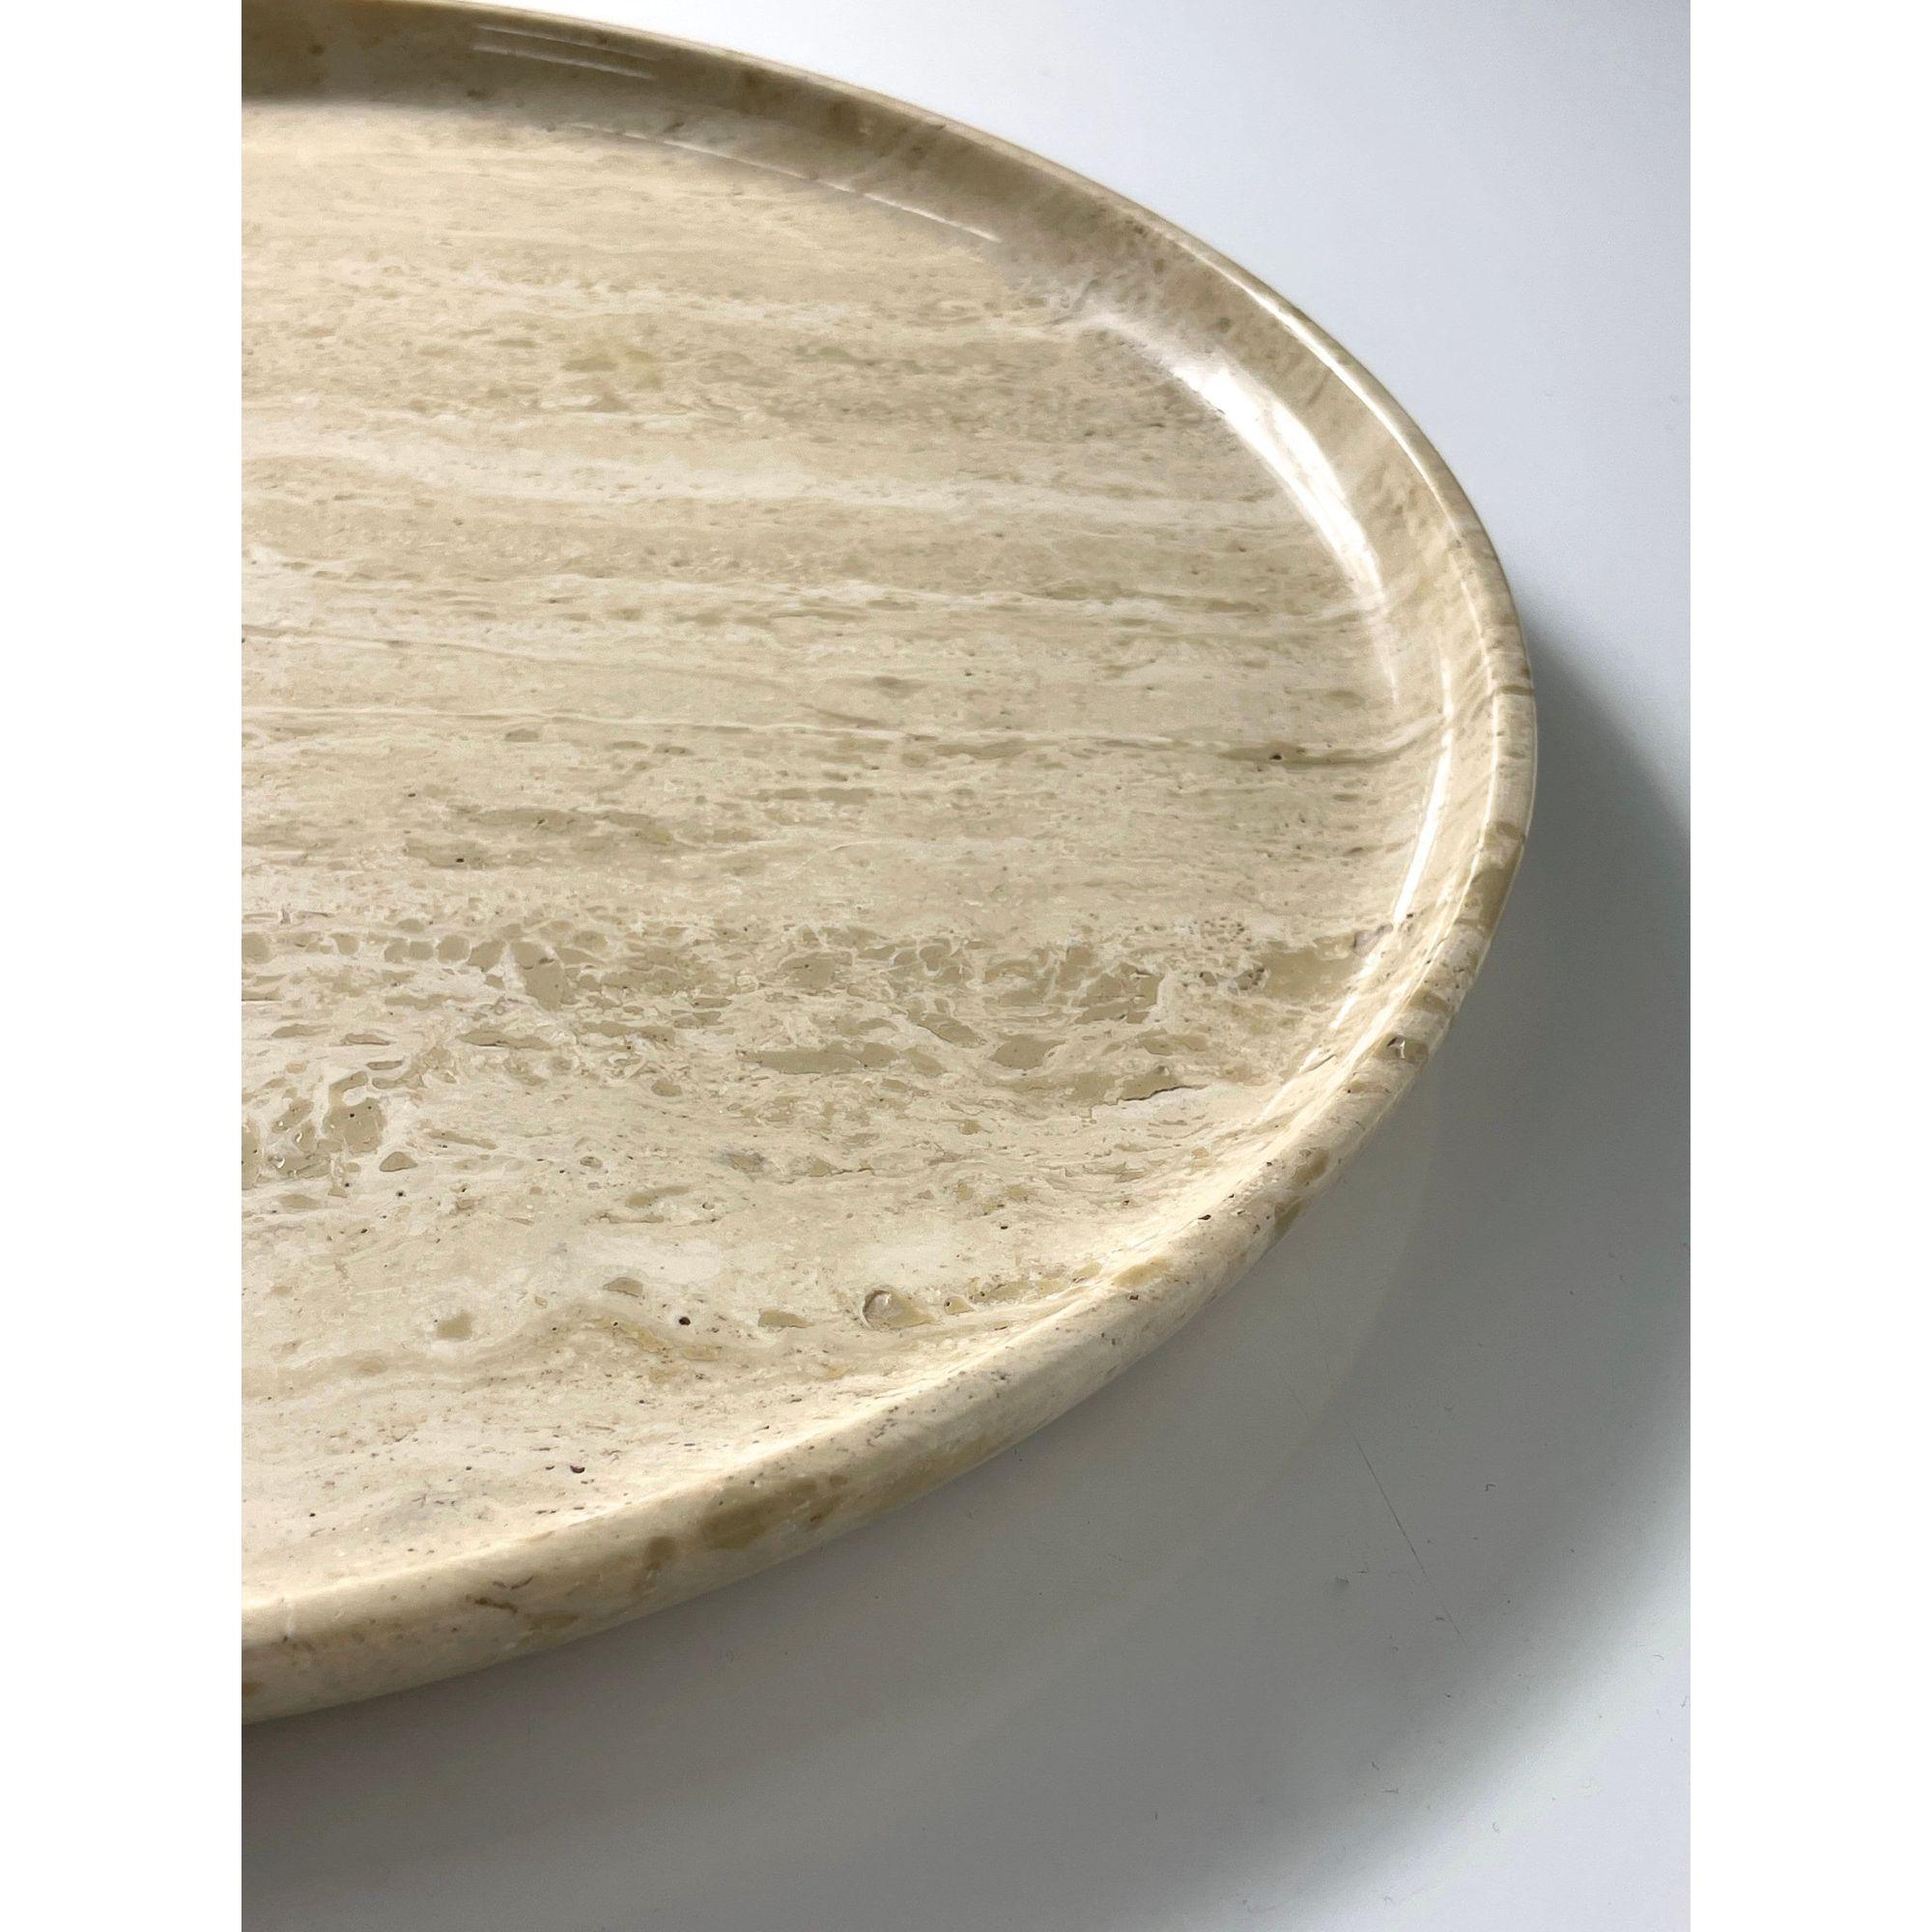 Polished Mid Century Modern Travertine Bowl Attributed to Giusti and Di Rosa circa 1970s For Sale